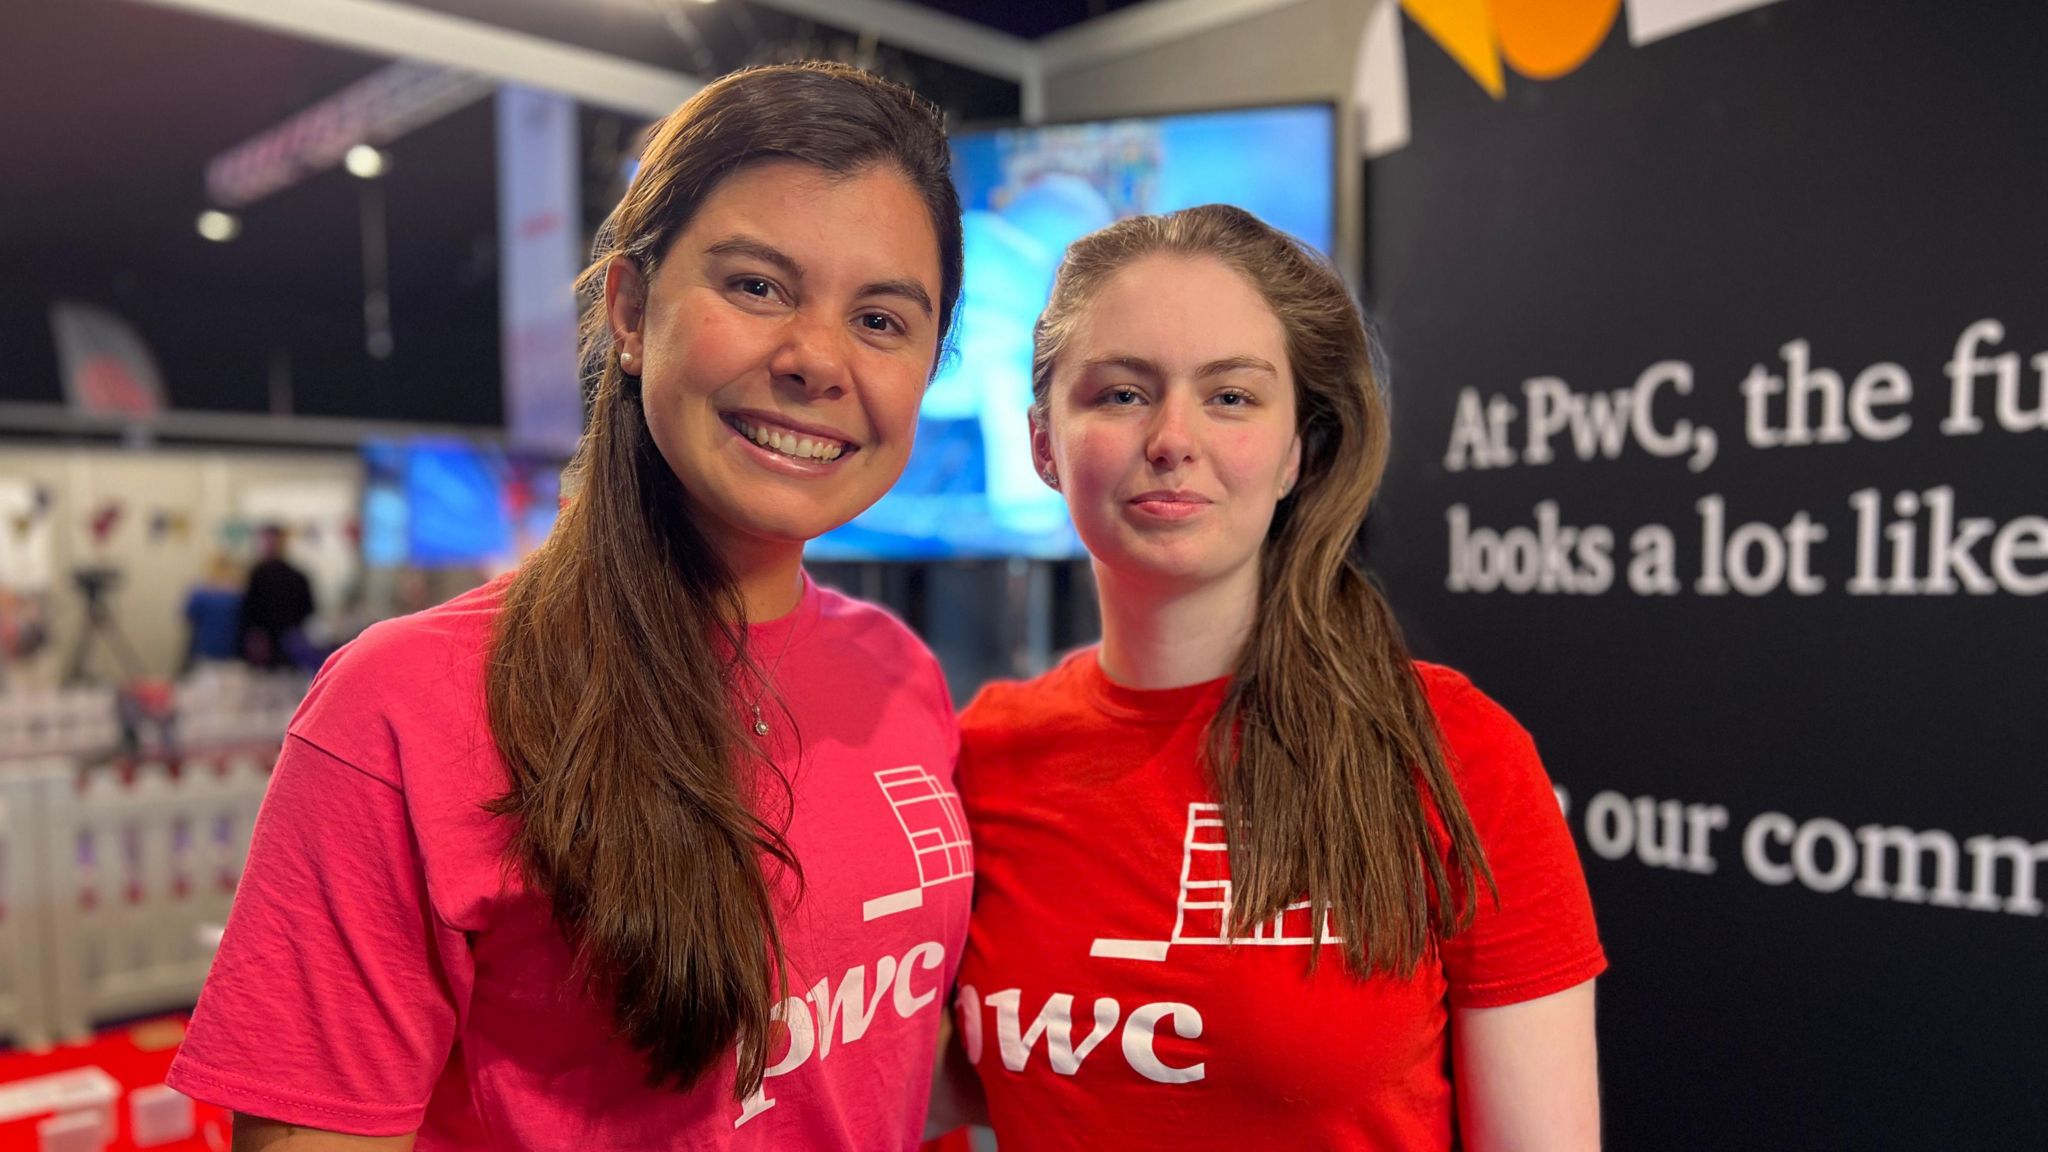 Ruth and Olivia smile at the camera wearing PwC tops and there is a PwC banner behind them